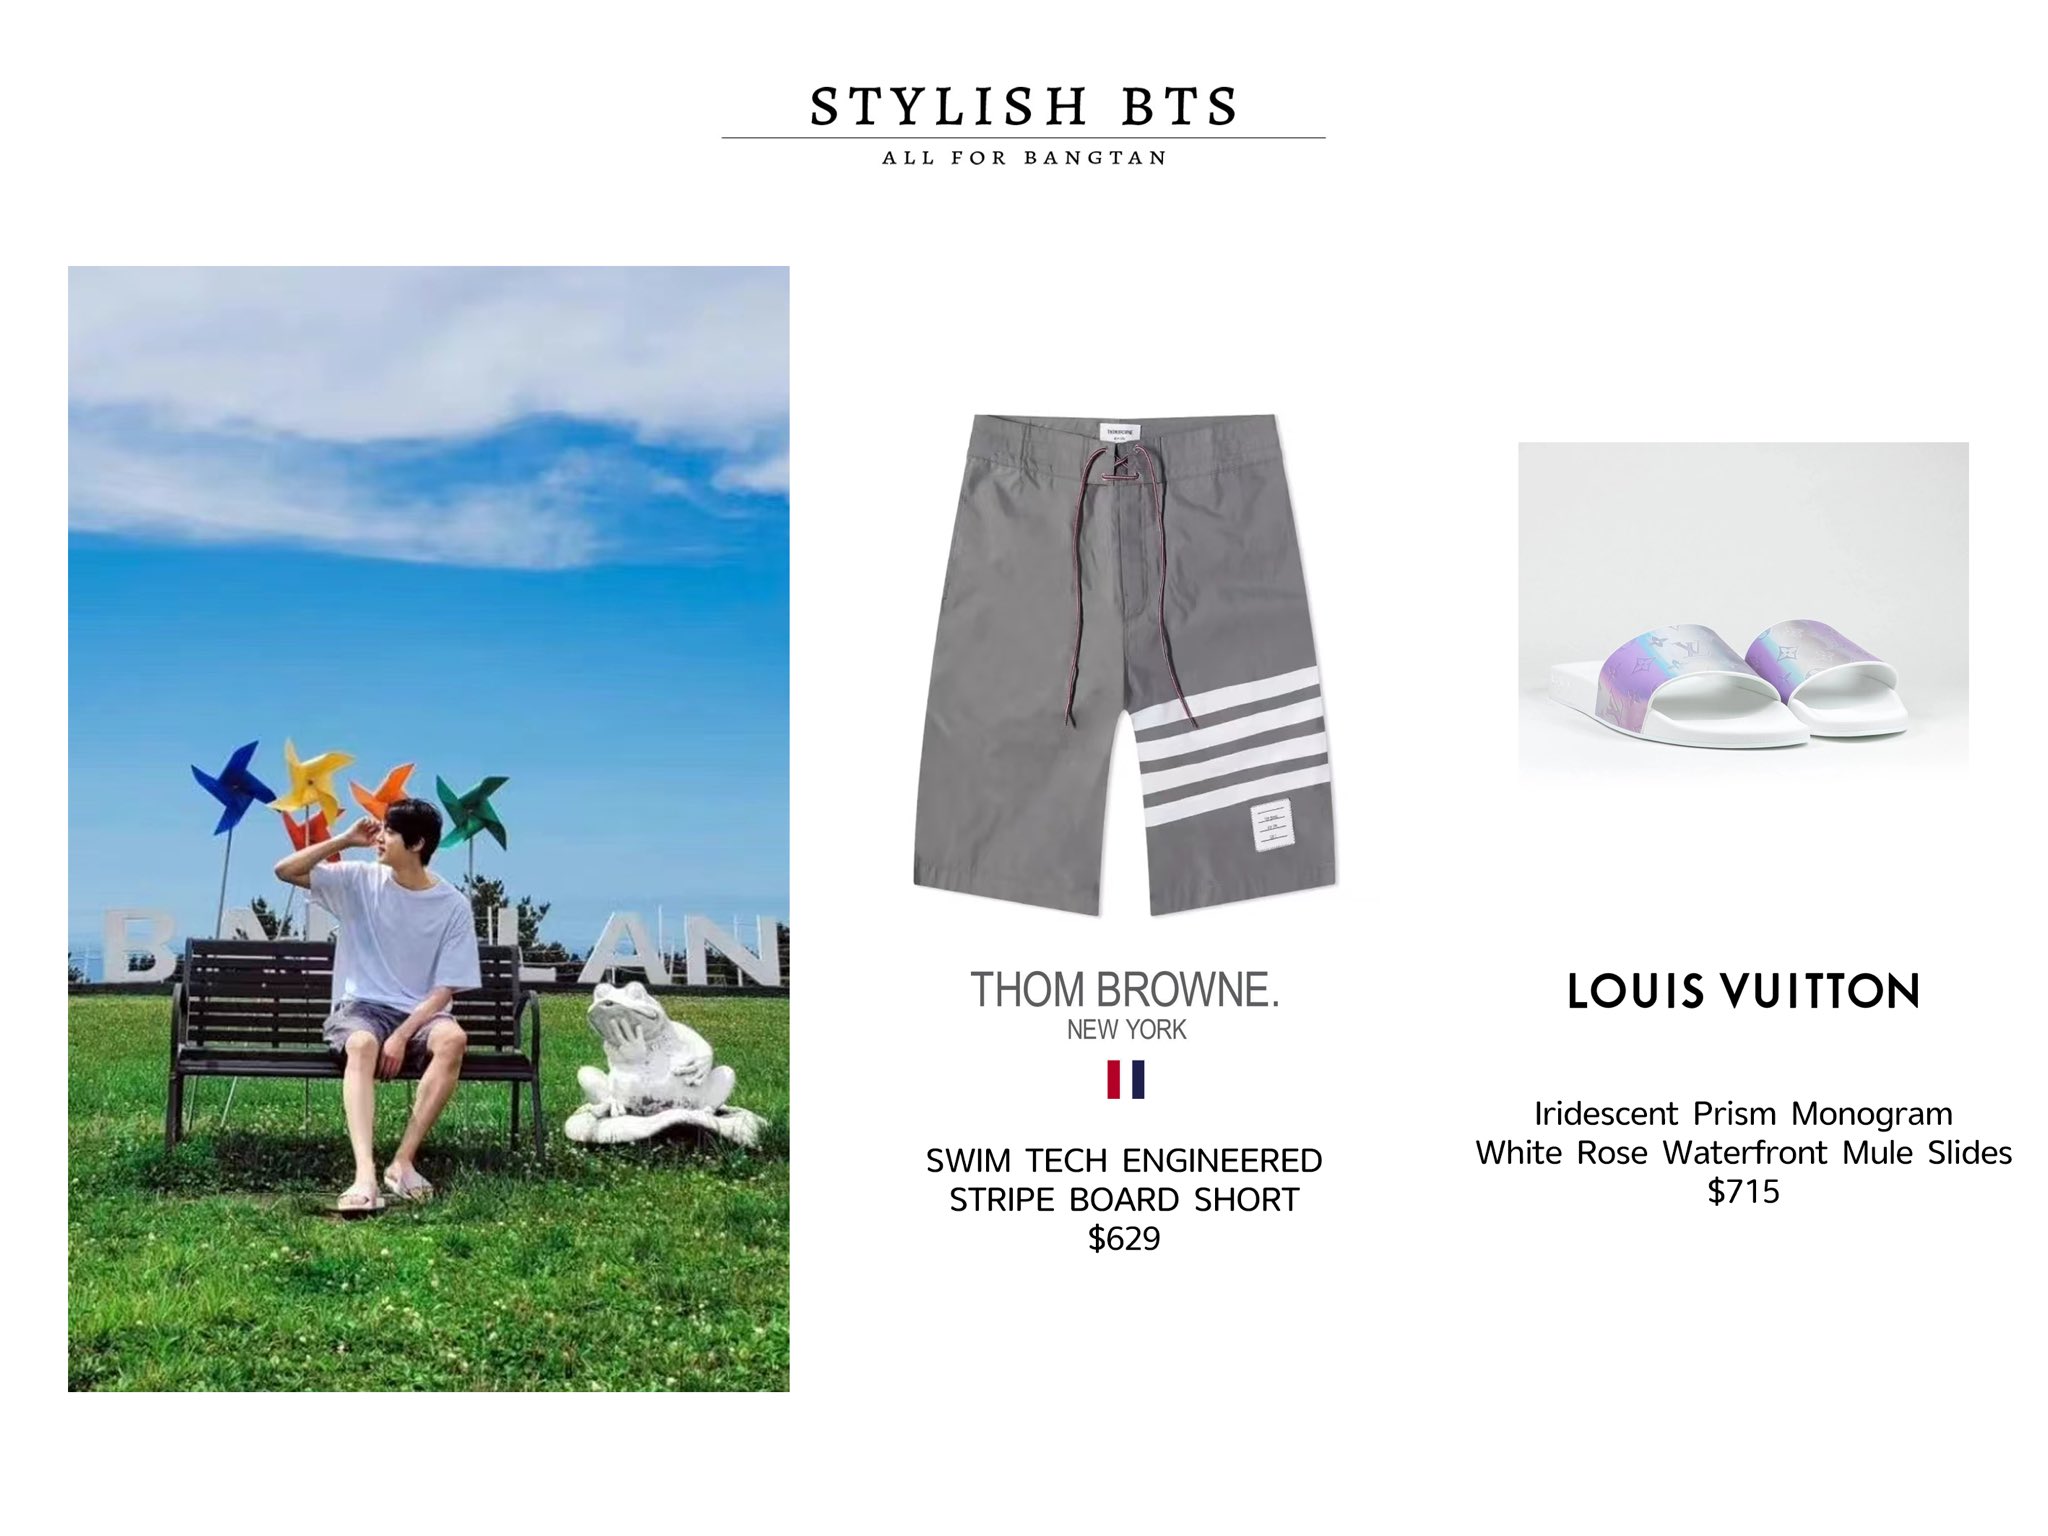 Stylish·BTS on X: #BTS 200821 #JIN NOHANT,THOM BROWNE and LOUIS VUITTON   / X